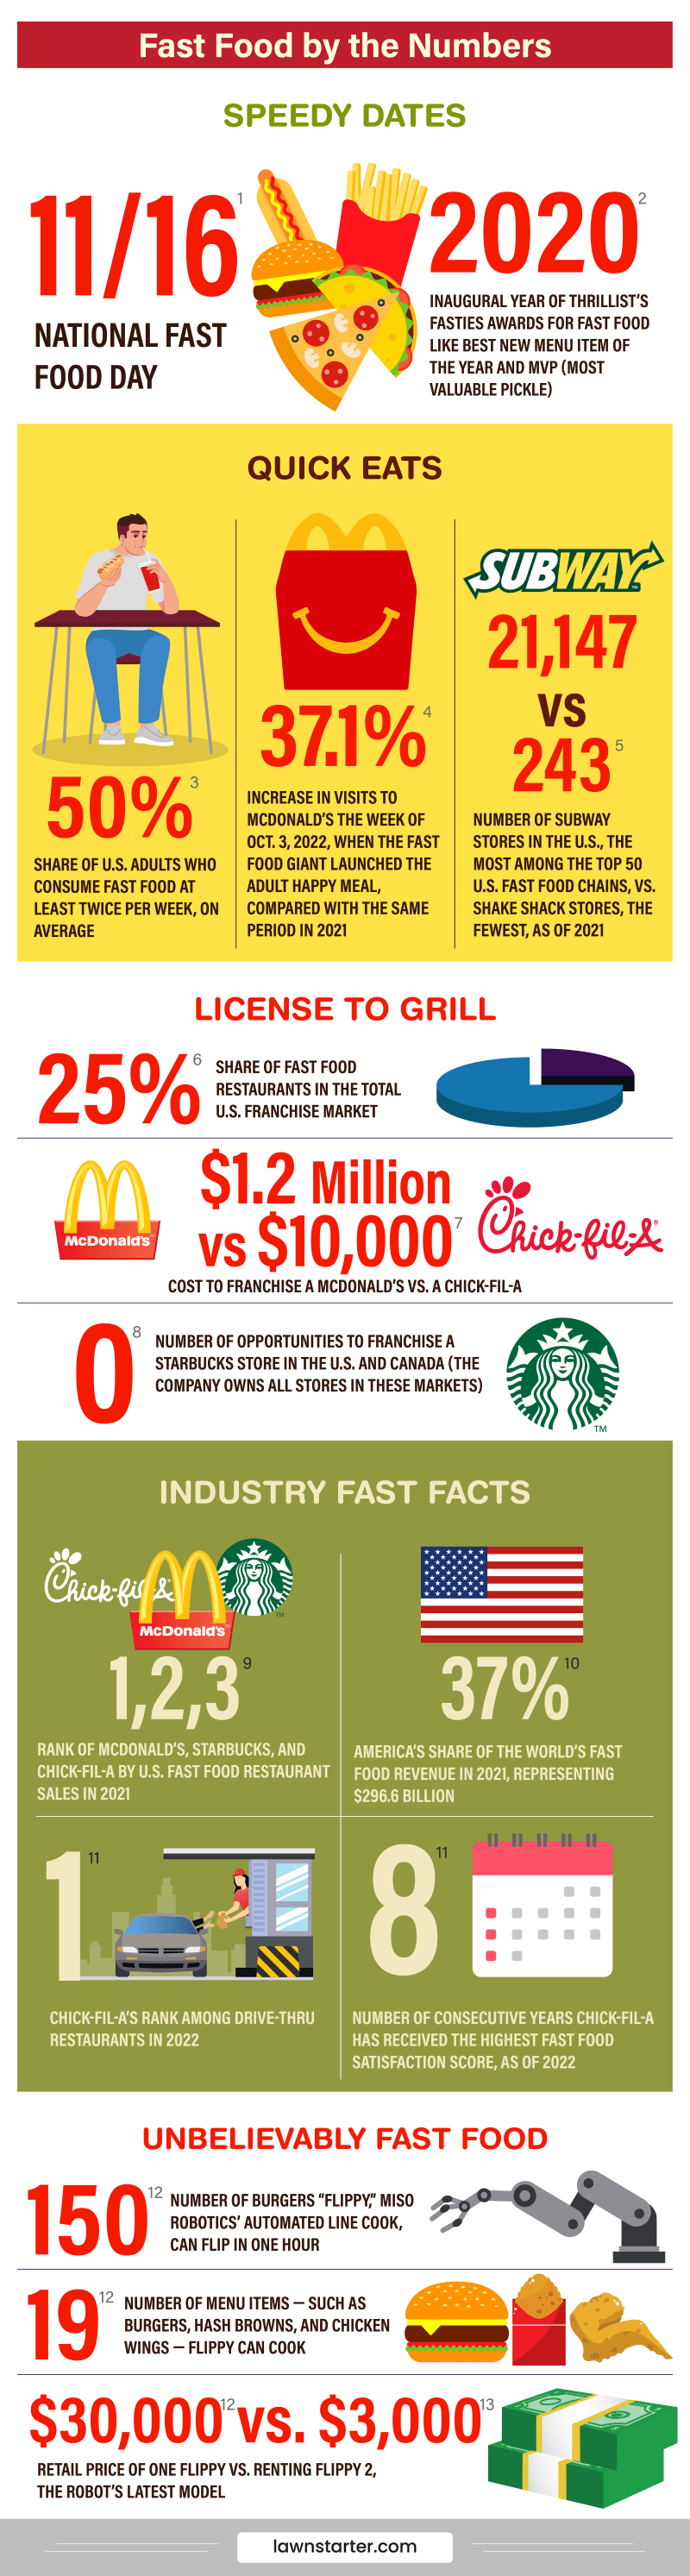 Infographic showing various statistics about fast food, including its history, consumption, sales, and more